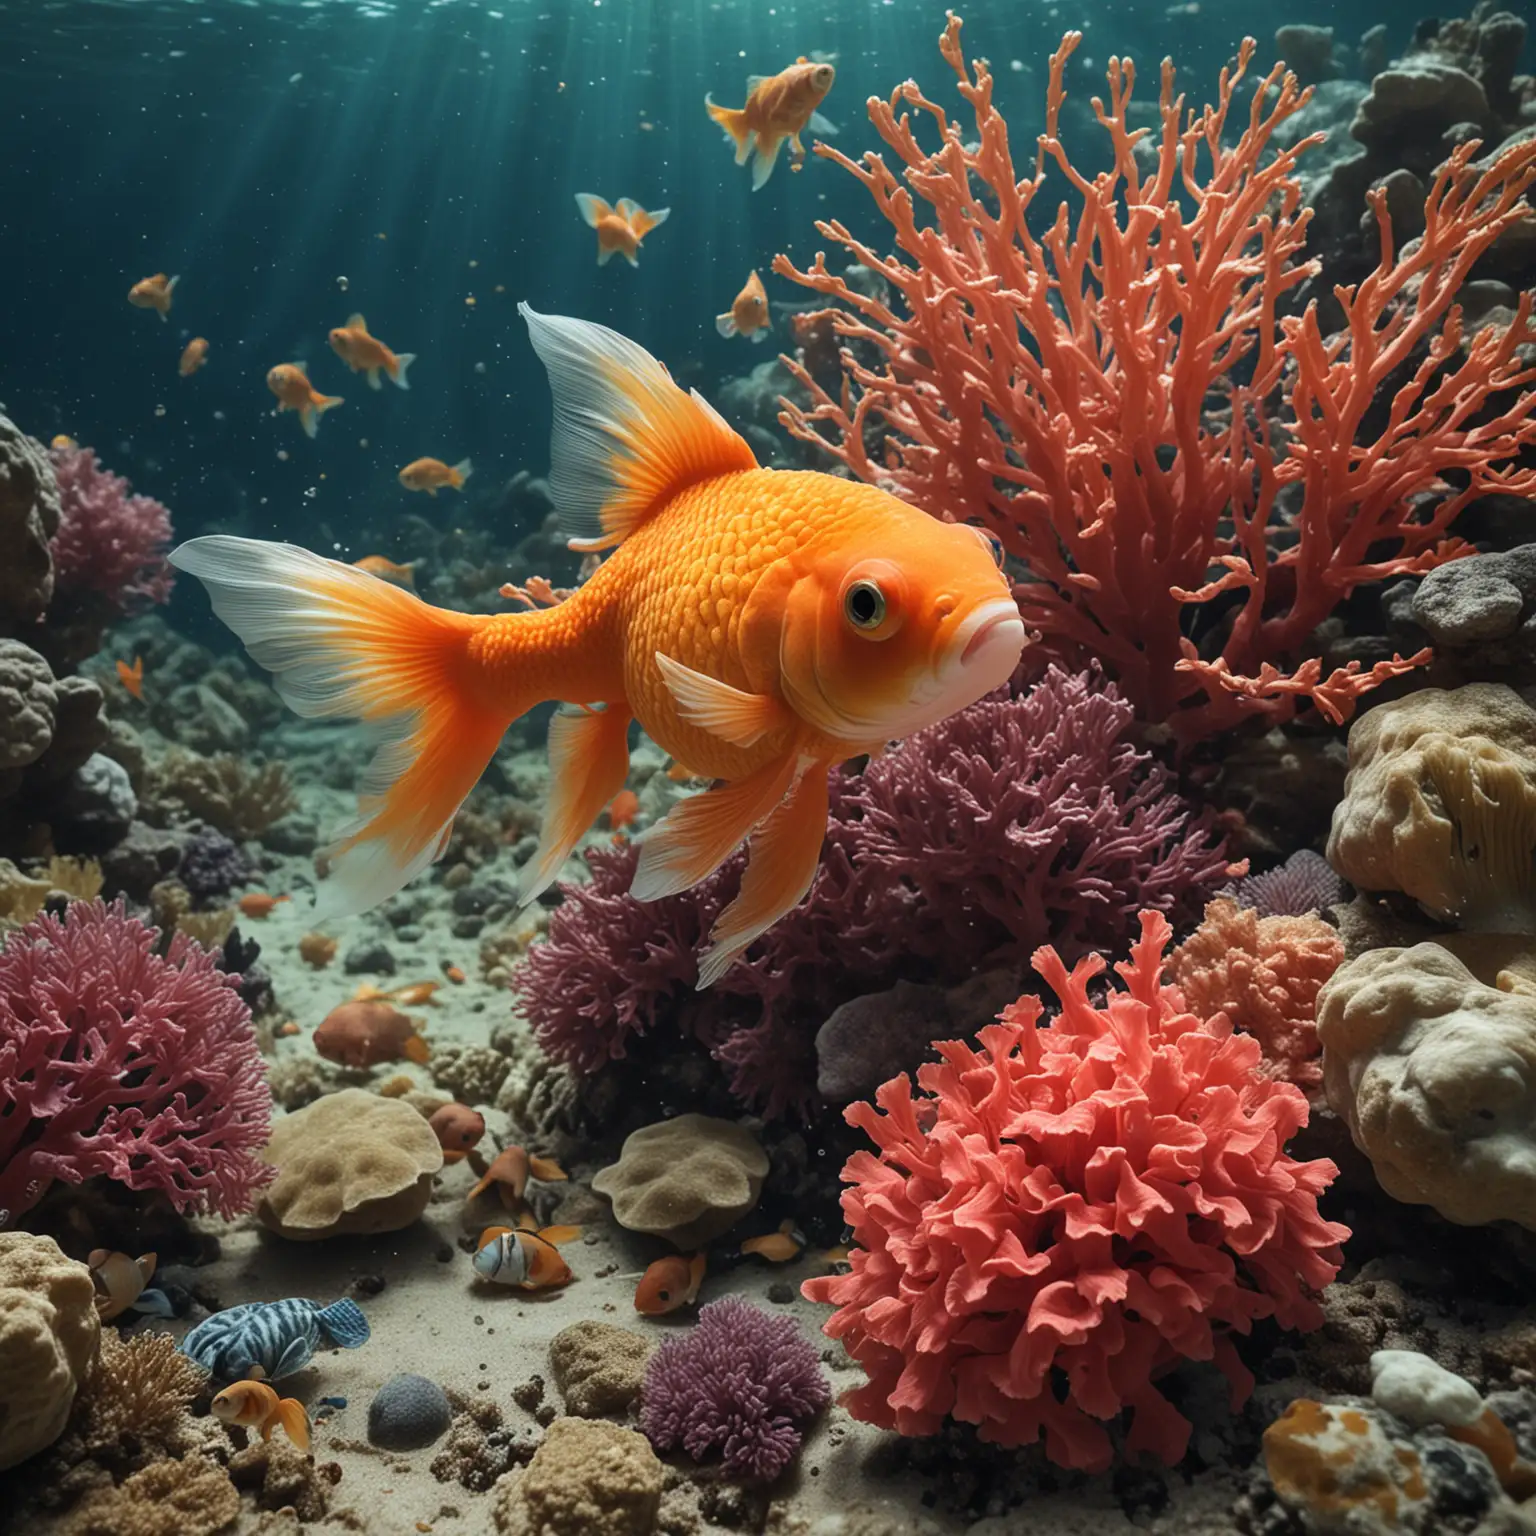 Anthropomorphic-Goldfish-Exploring-Mysterious-Coral-on-the-Colorful-Sea-Bottom